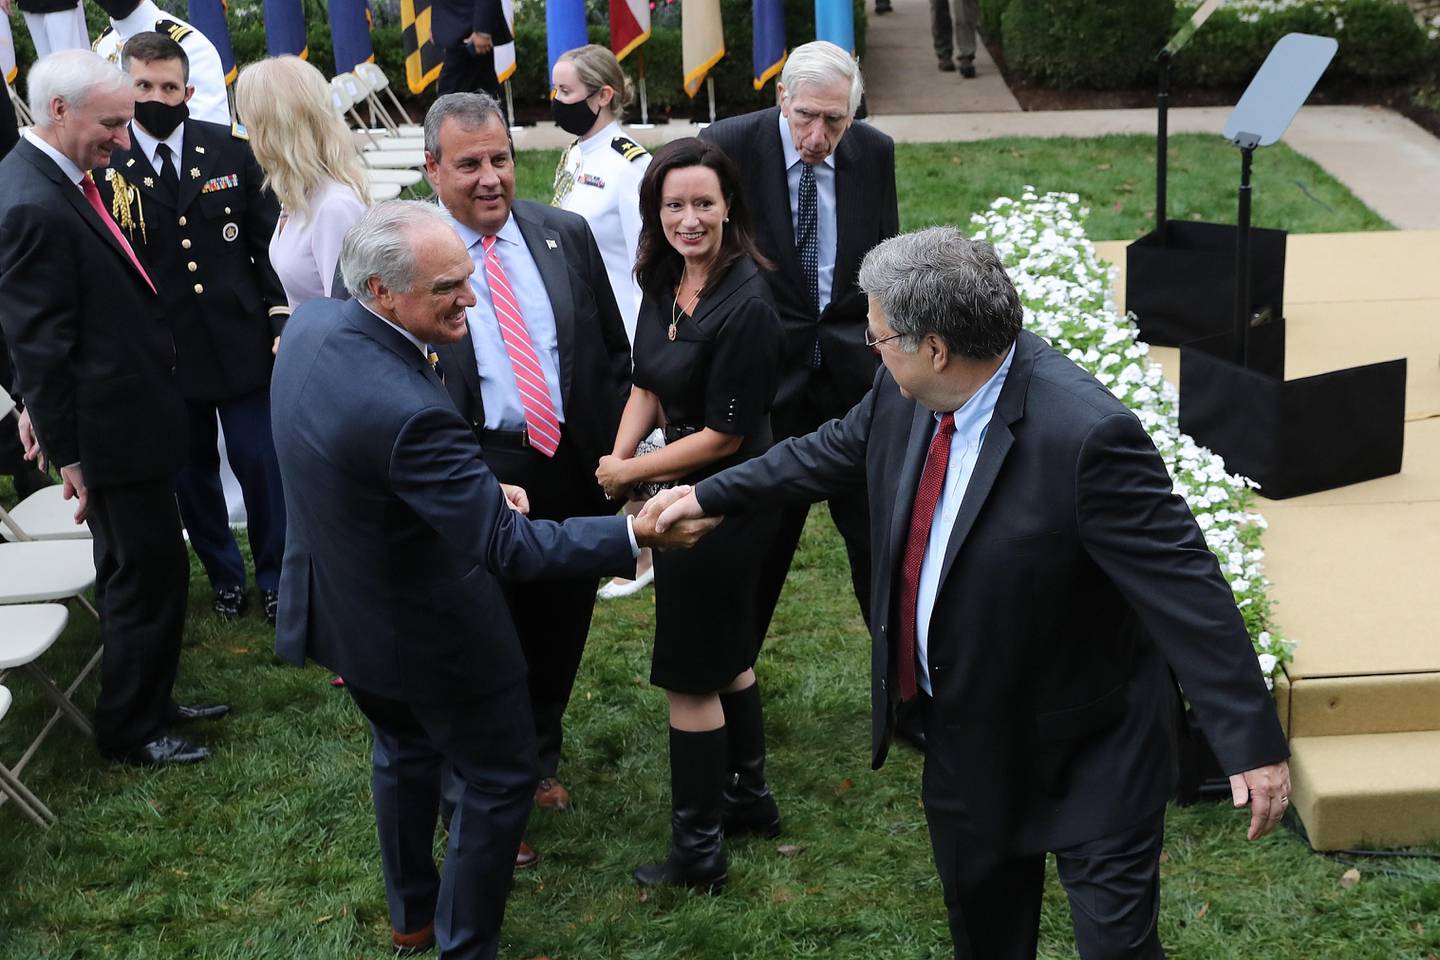 WASHINGTON, DC - SEPTEMBER 26: Attorney General William Barr (R) says goodbye to former New Jersey Governor Chris Christie and other guests after President Donald Trump introducee 7th U.S. Circuit Court Judge Amy Coney Barrett, 48, as his nominee to the Supreme Court in the Rose Garden at the White House September 26, 2020 in Washington, DC. With 38 days until the election, Trump tapped Barrett to be his third Supreme Court nominee in just four years and to replace the late Associate Justice Ruth Bader Ginsburg, who will be buried at Arlington National Cemetery on Tuesday.   Chip Somodevilla/Getty Images/AFP
== FOR NEWSPAPERS, INTERNET, TELCOS & TELEVISION USE ONLY ==